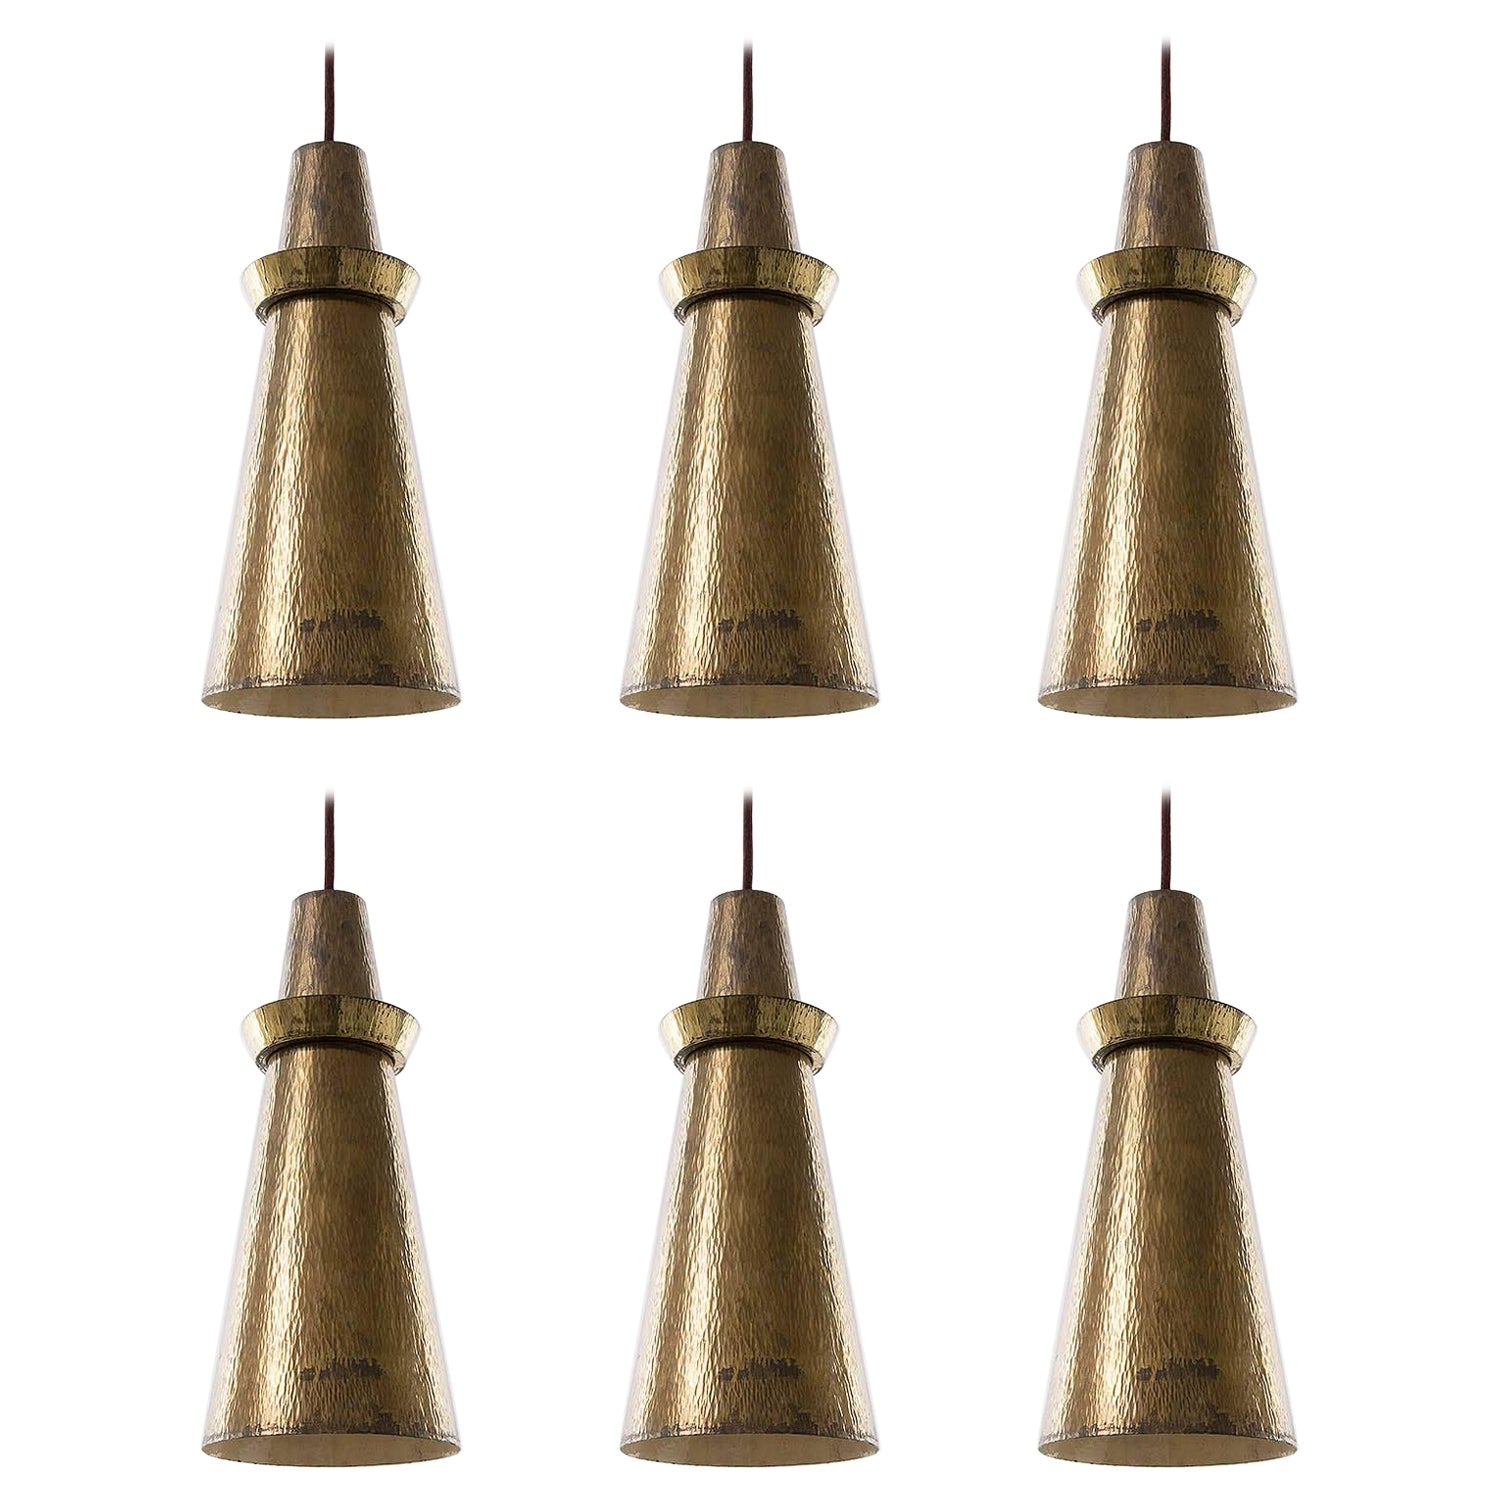 One of Six Pendant Lights, Hammered Patinated Brass, 1960s